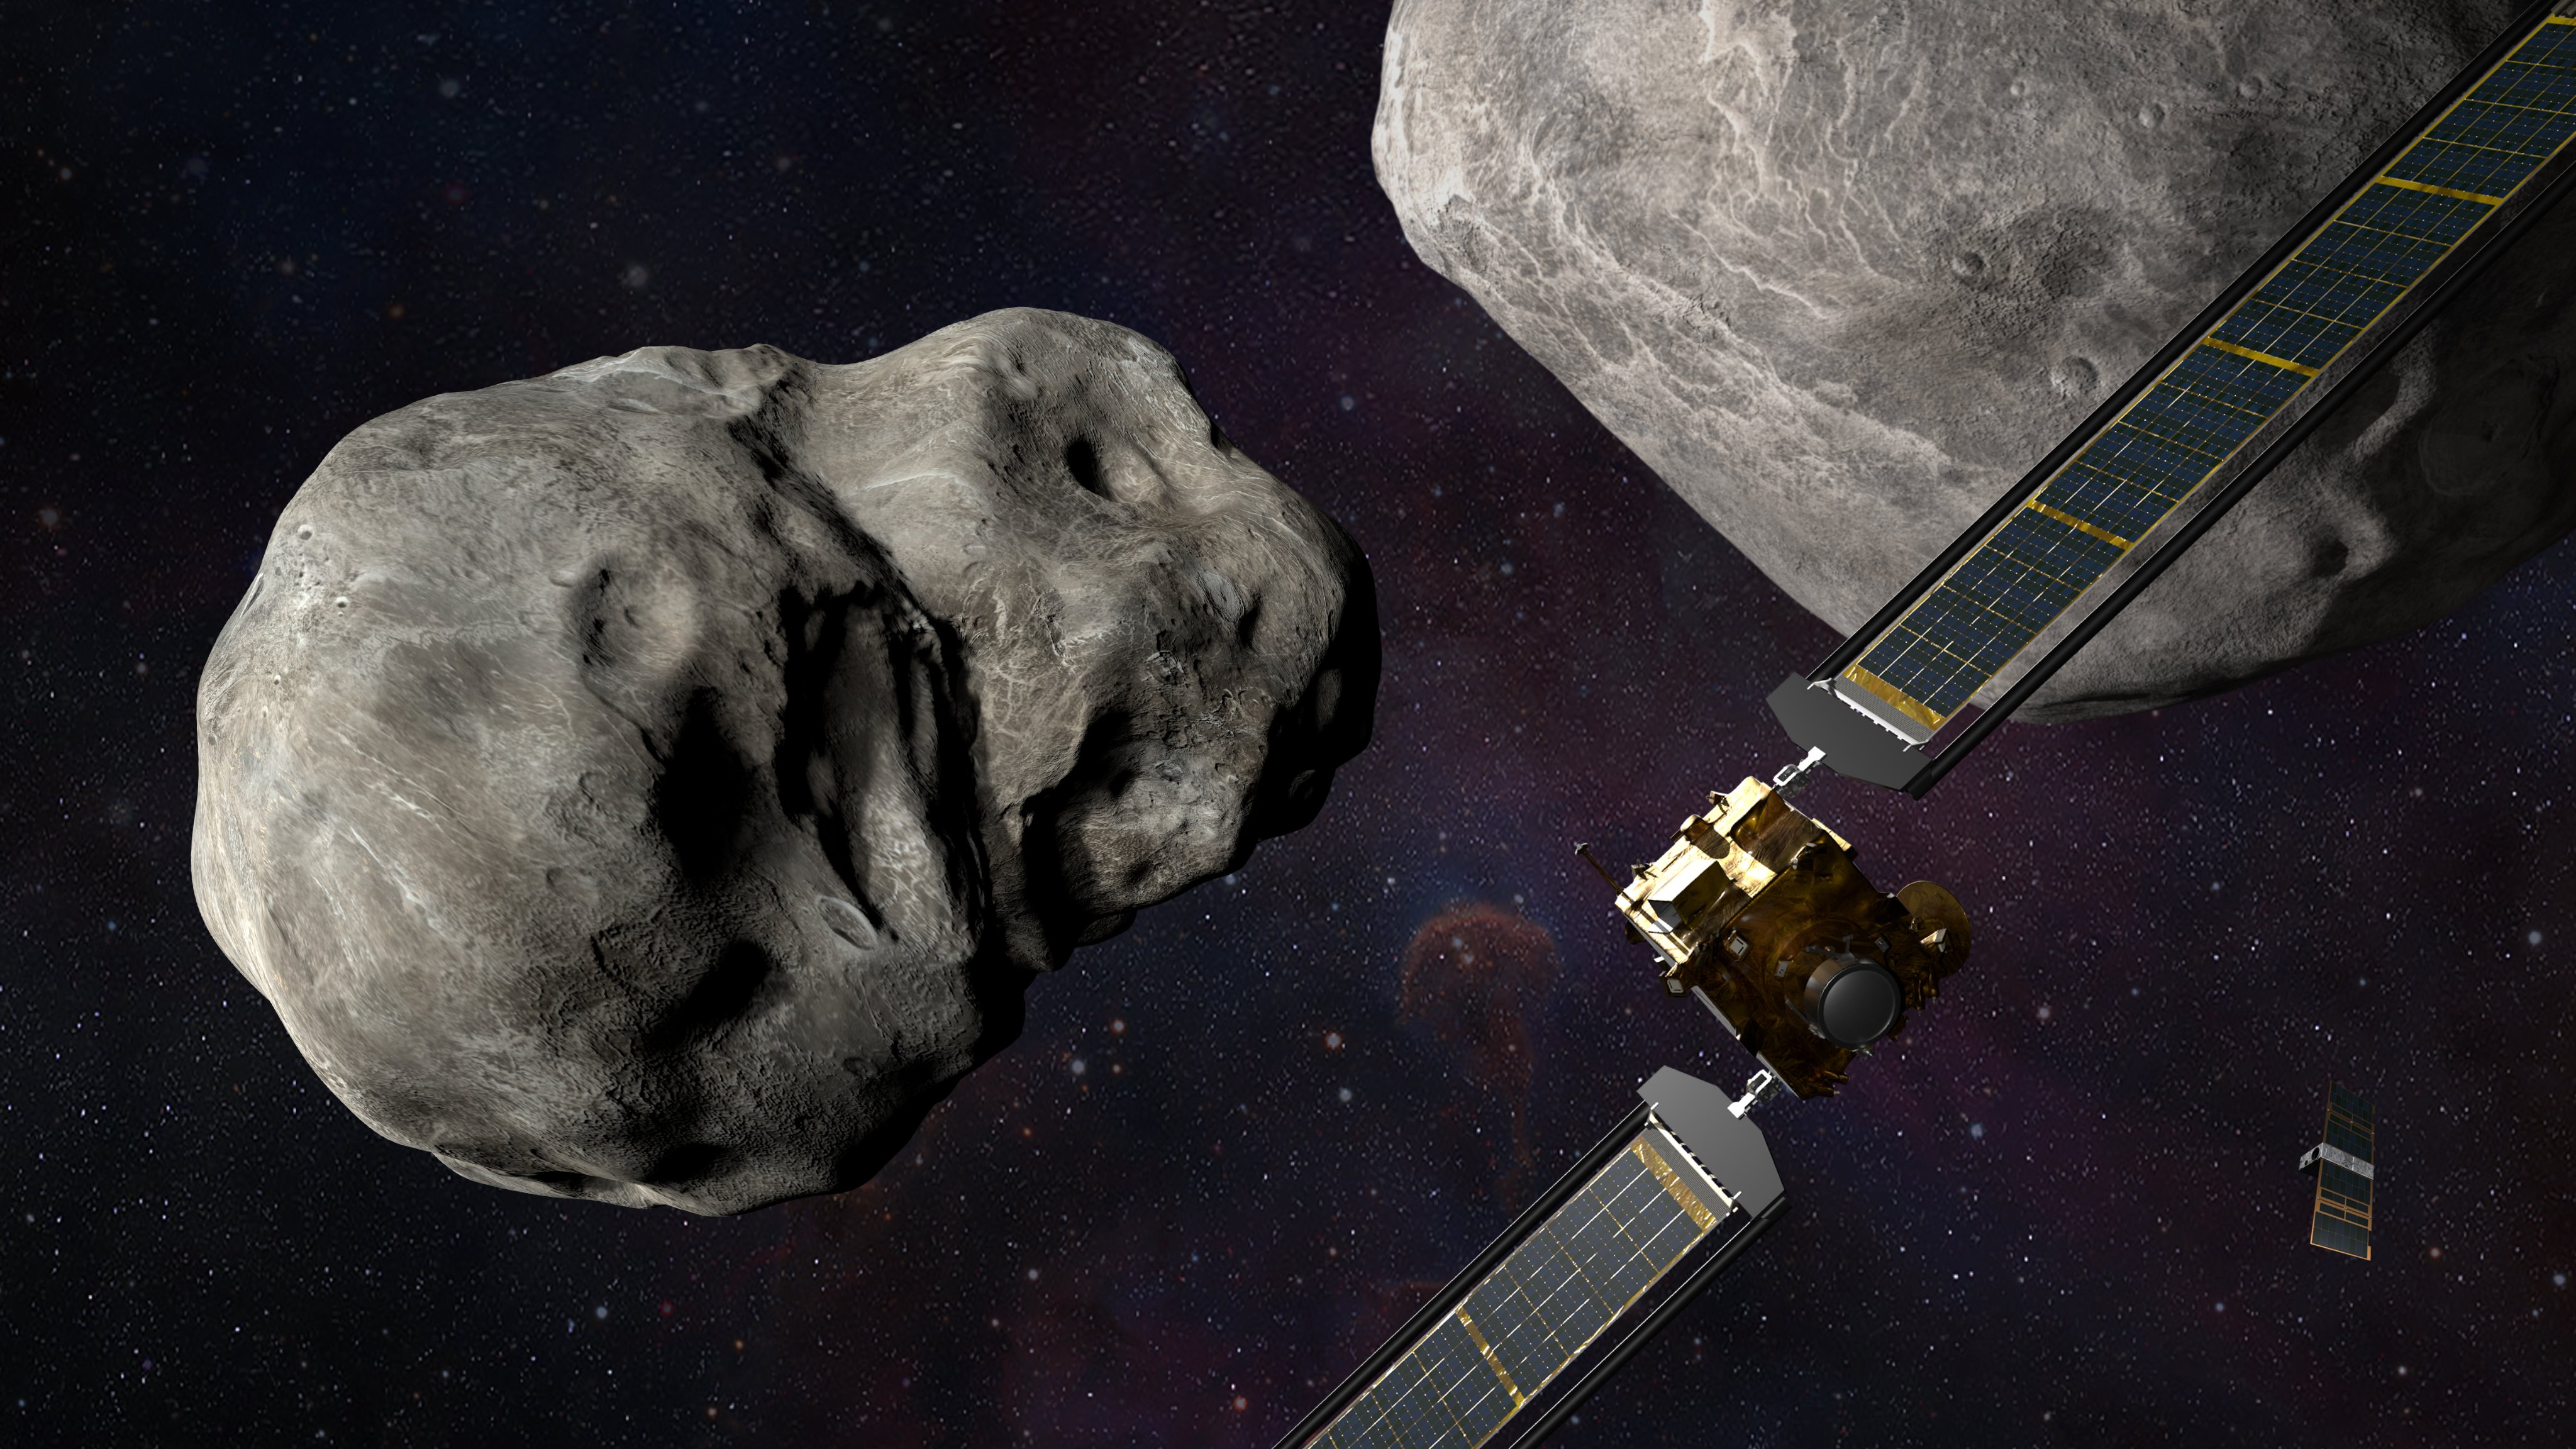 (Updated) NASA spacecraft will intentionally collide with an asteroid; watch live